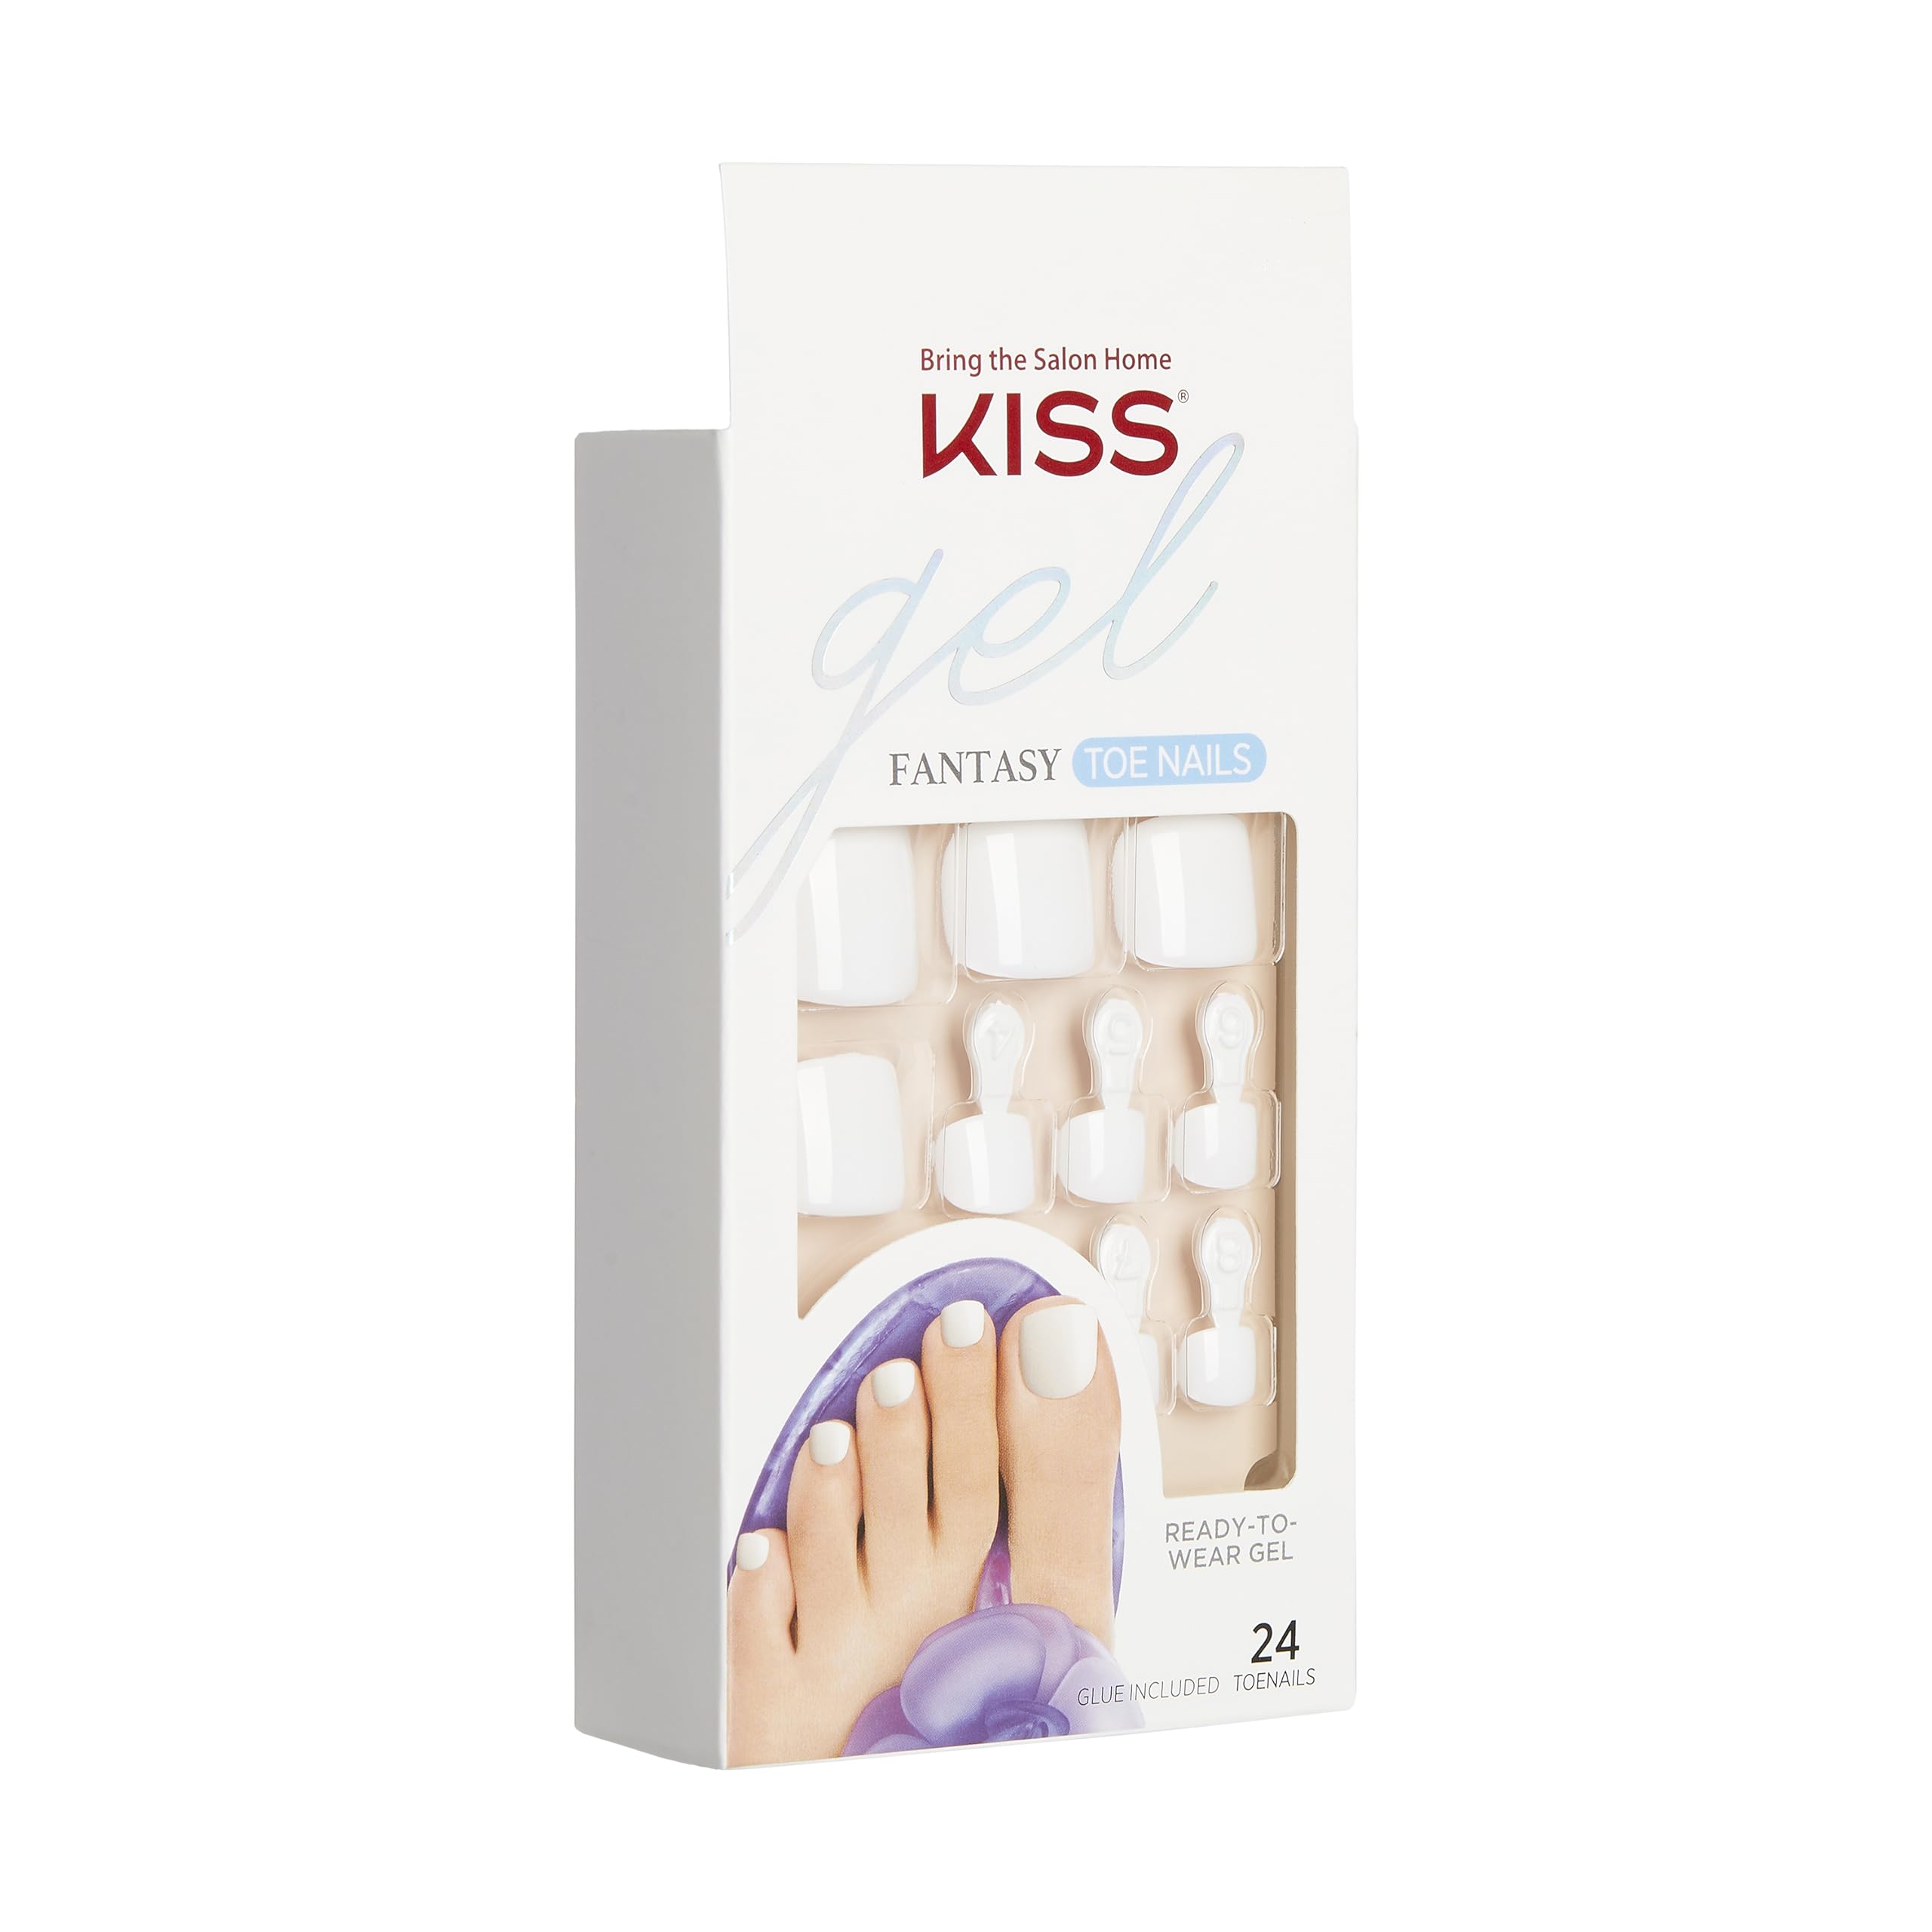 KISS Gel Fantasy Collection Ready-To-Wear Fake Toenails Pedicure Set, Style 'This is Classic', with Mini Nail File, Pink Gel Nail Glue & 28 White Smudge-Proof Glue-On Toenails